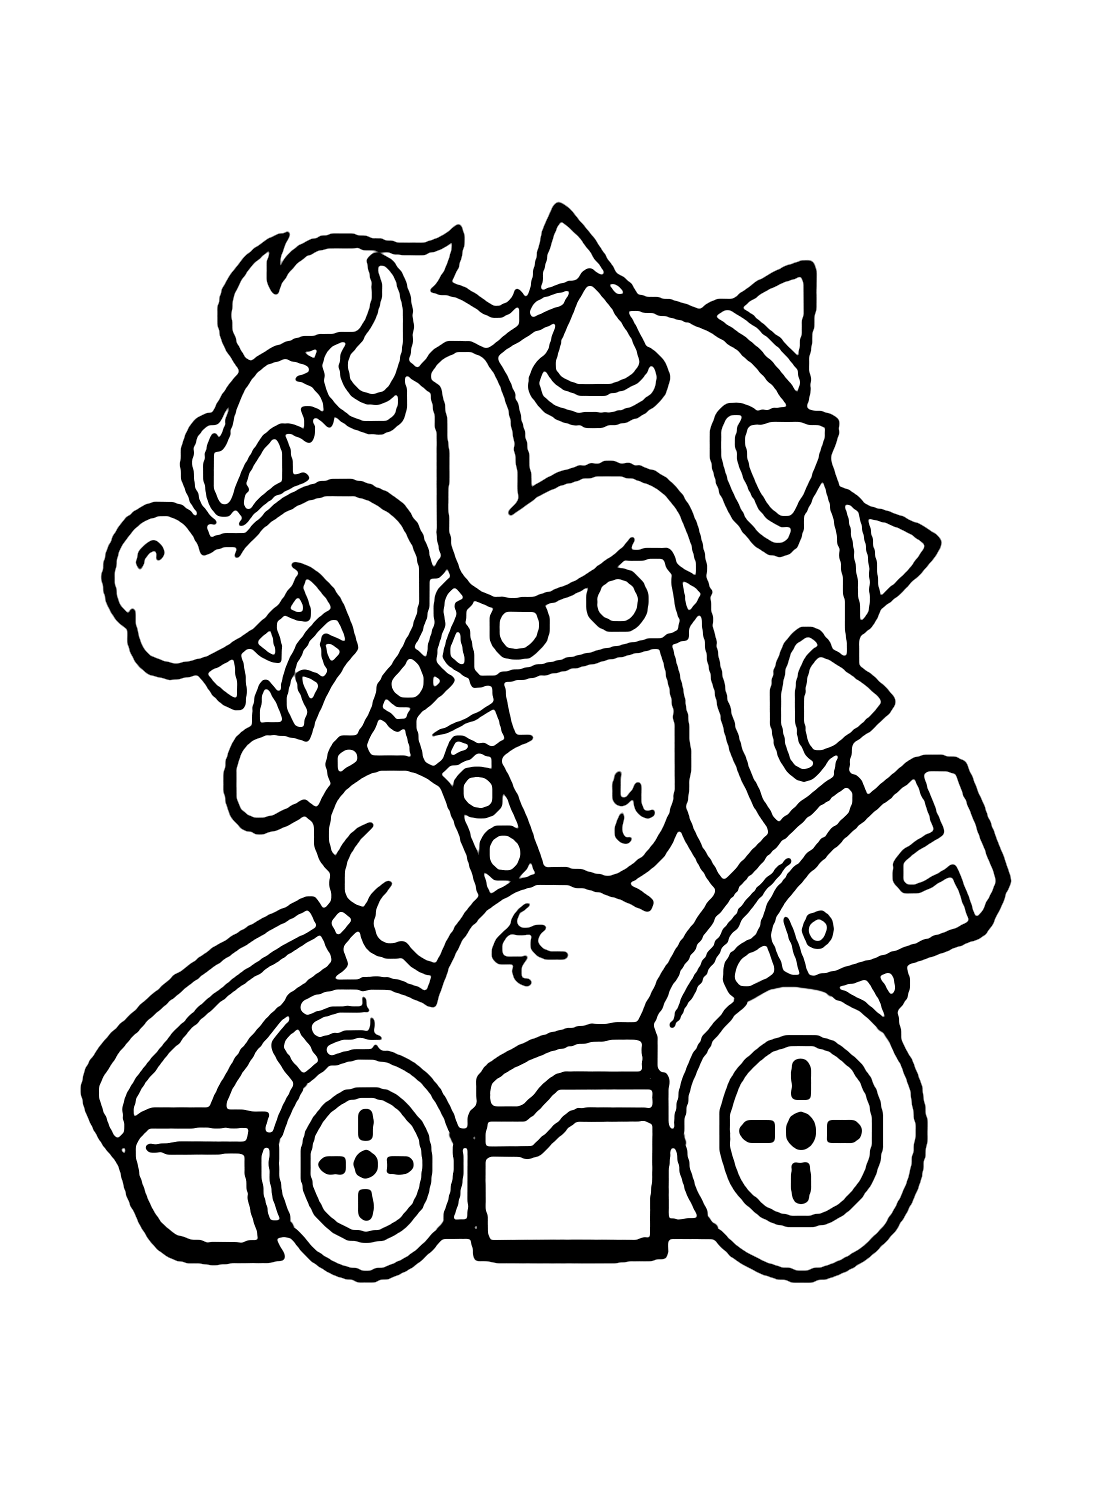 Bowser from Mario Kart Coloring Pages